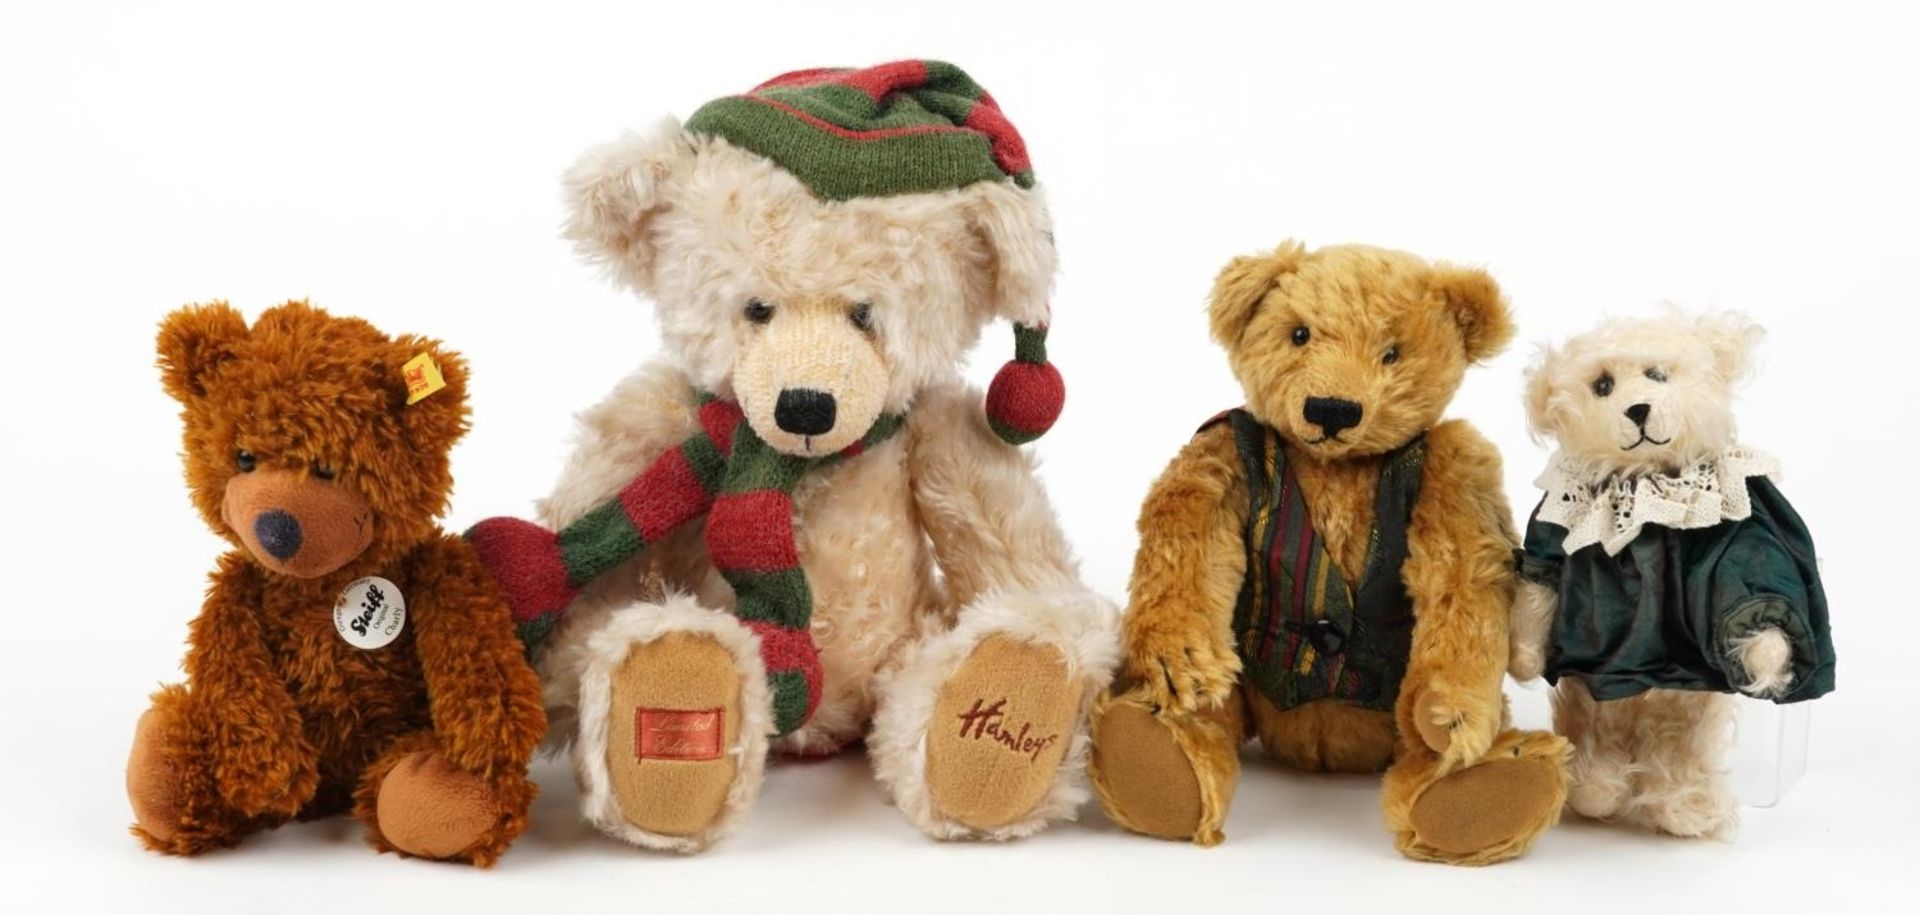 Four teddy bears including Steiff Charly and Hambey's limited edition bear, the largest 32cm